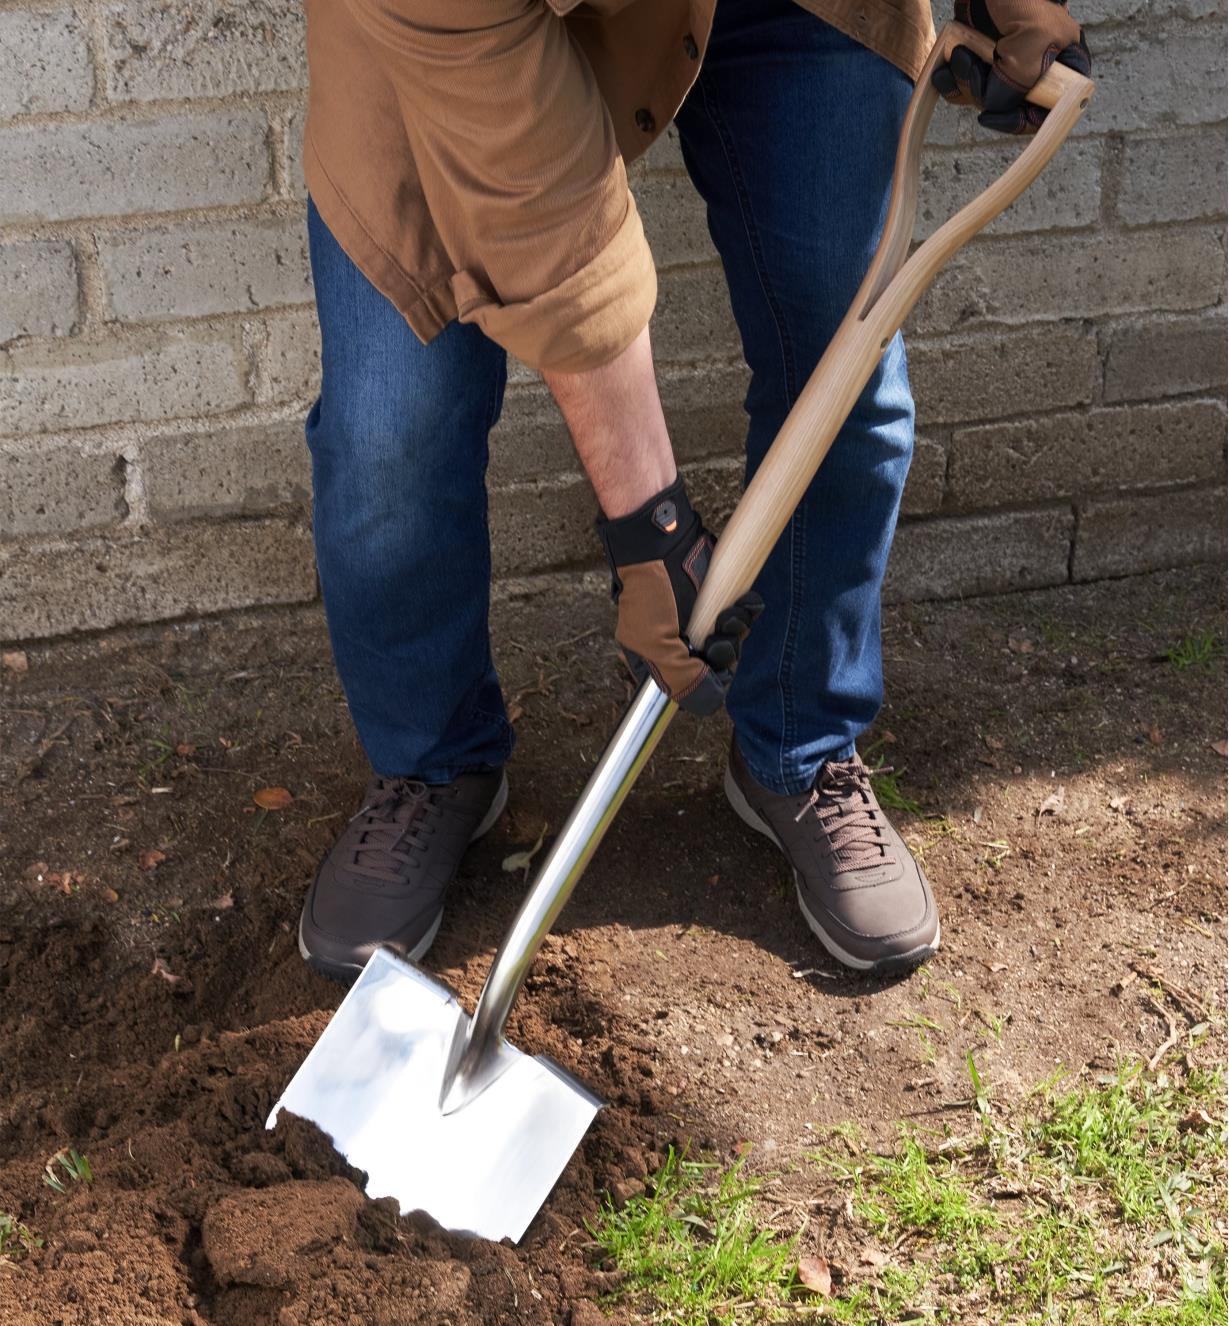 A gardener uses the stainless-steel shovel to dig into soil